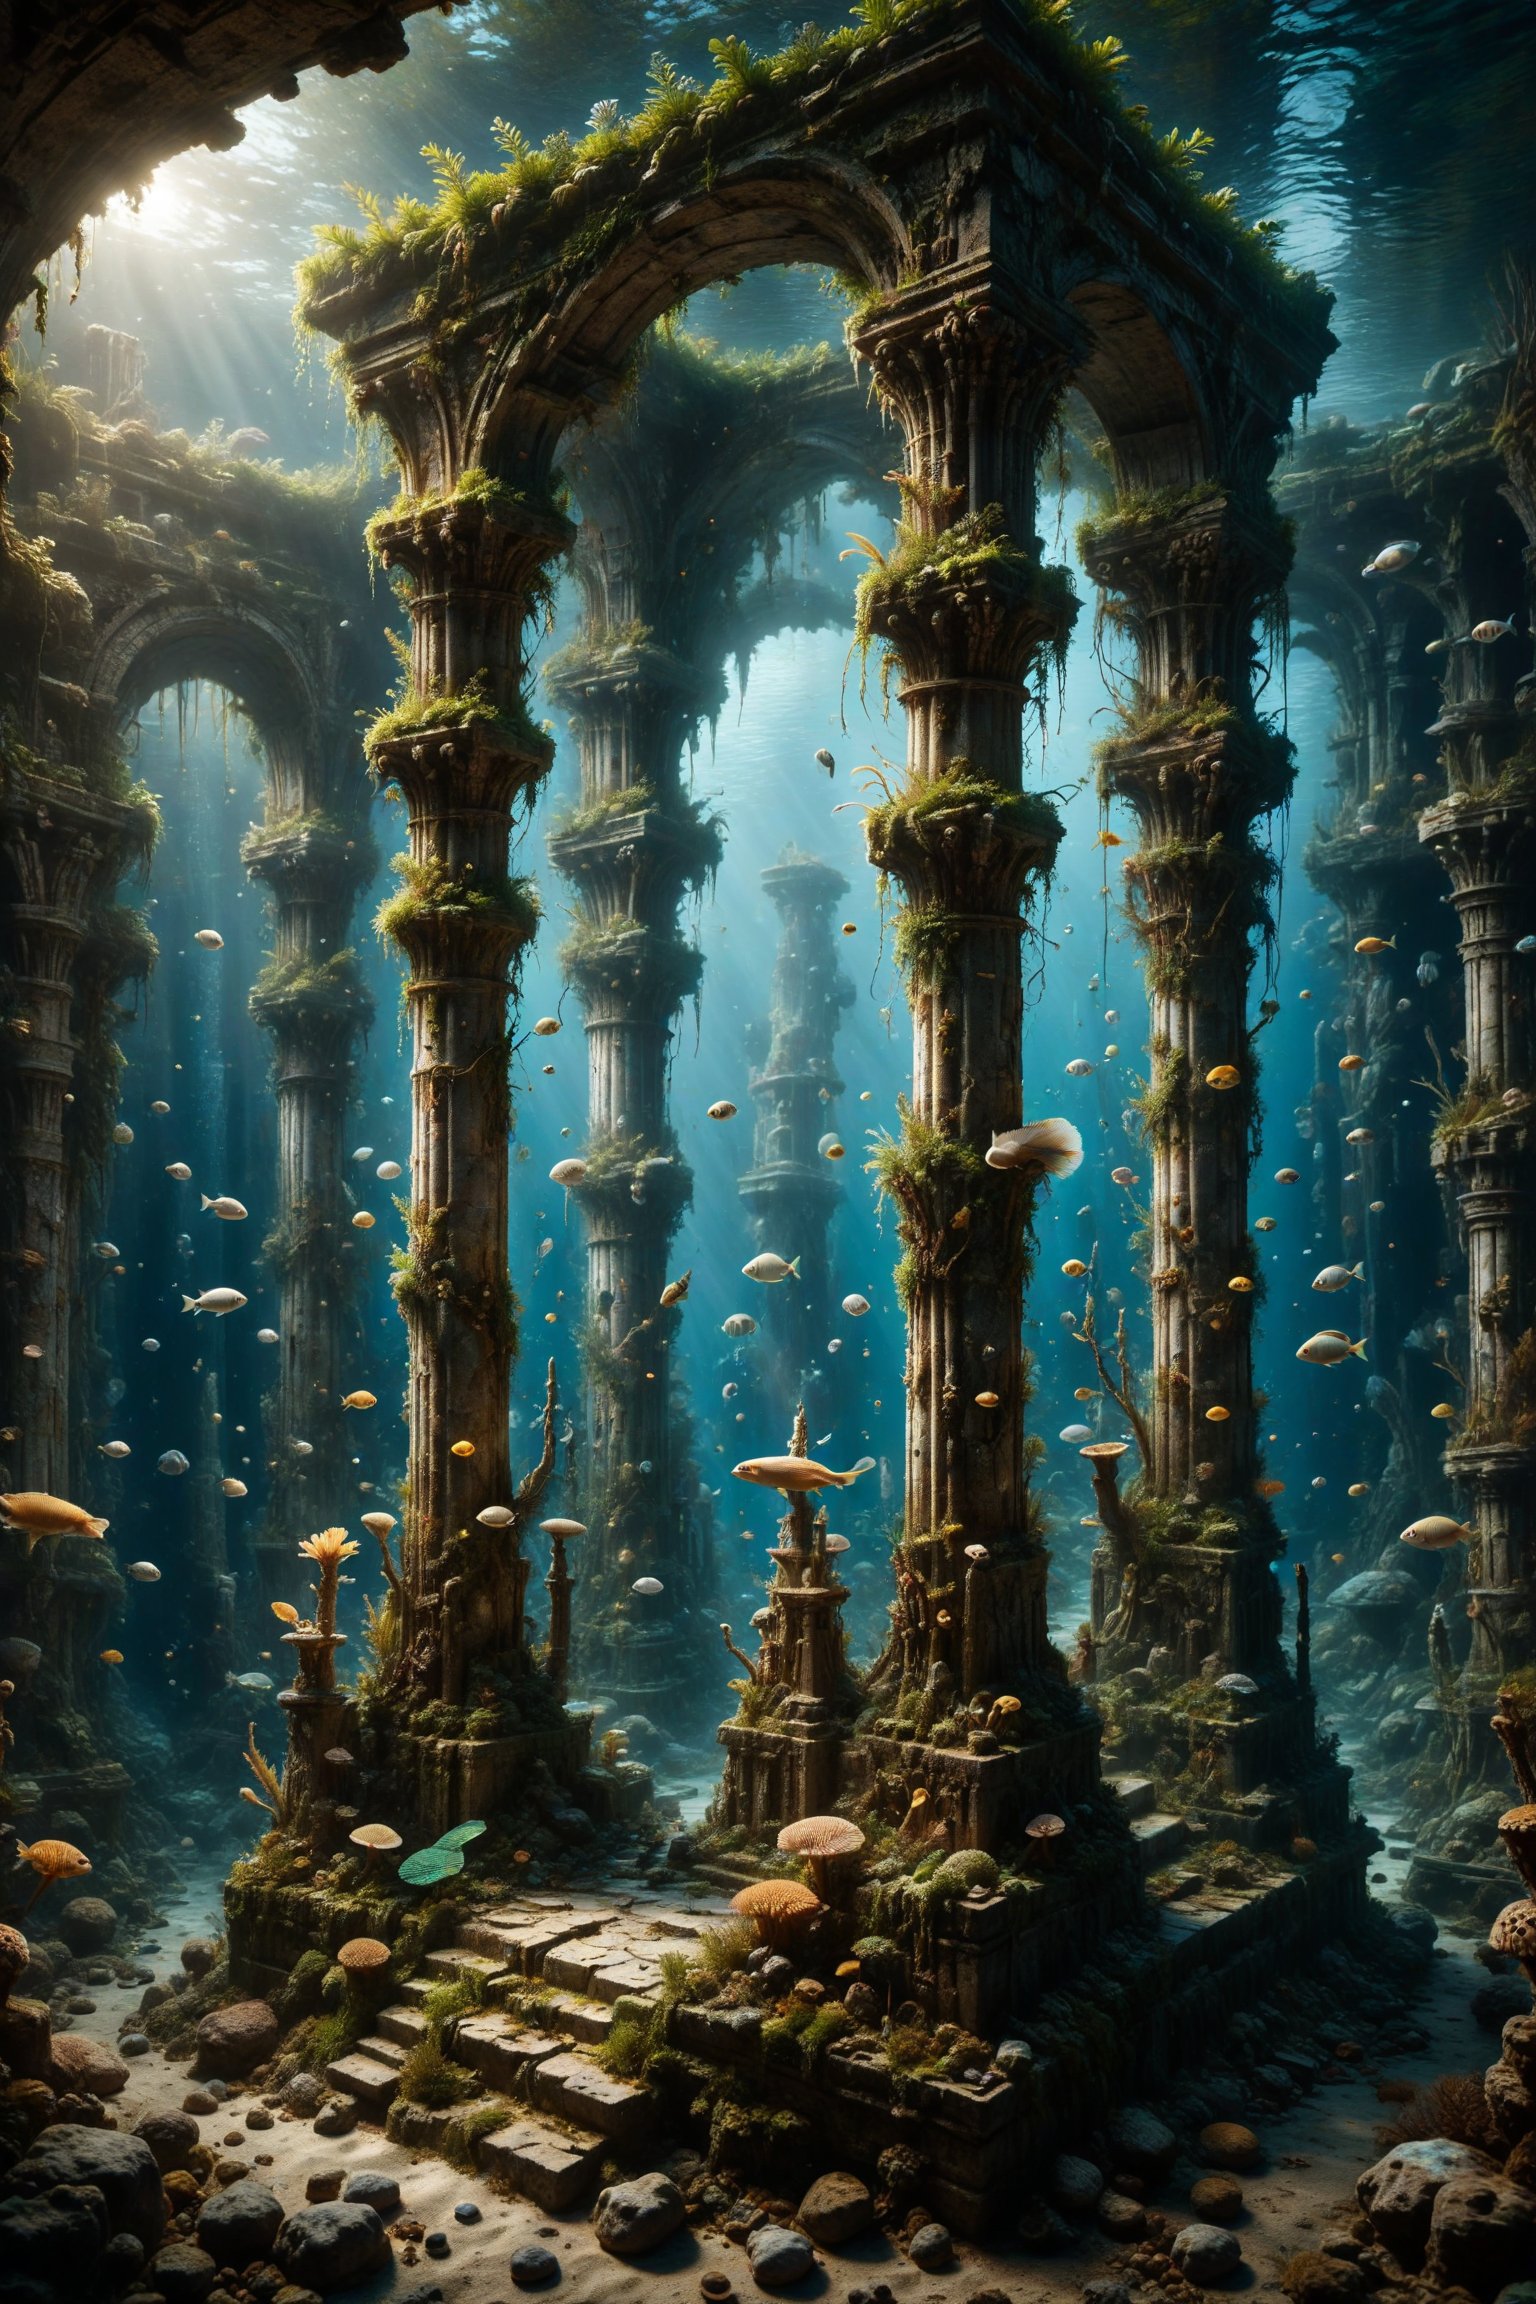 An aquarium with interesting, surreal organic curves, evoking the legendary lost city of Atlantis with candelabras resembling ancient submerged columns. Inlaid underwater ruins, decorative gold accents, feathers, diamonds, and iridescent bubbles.